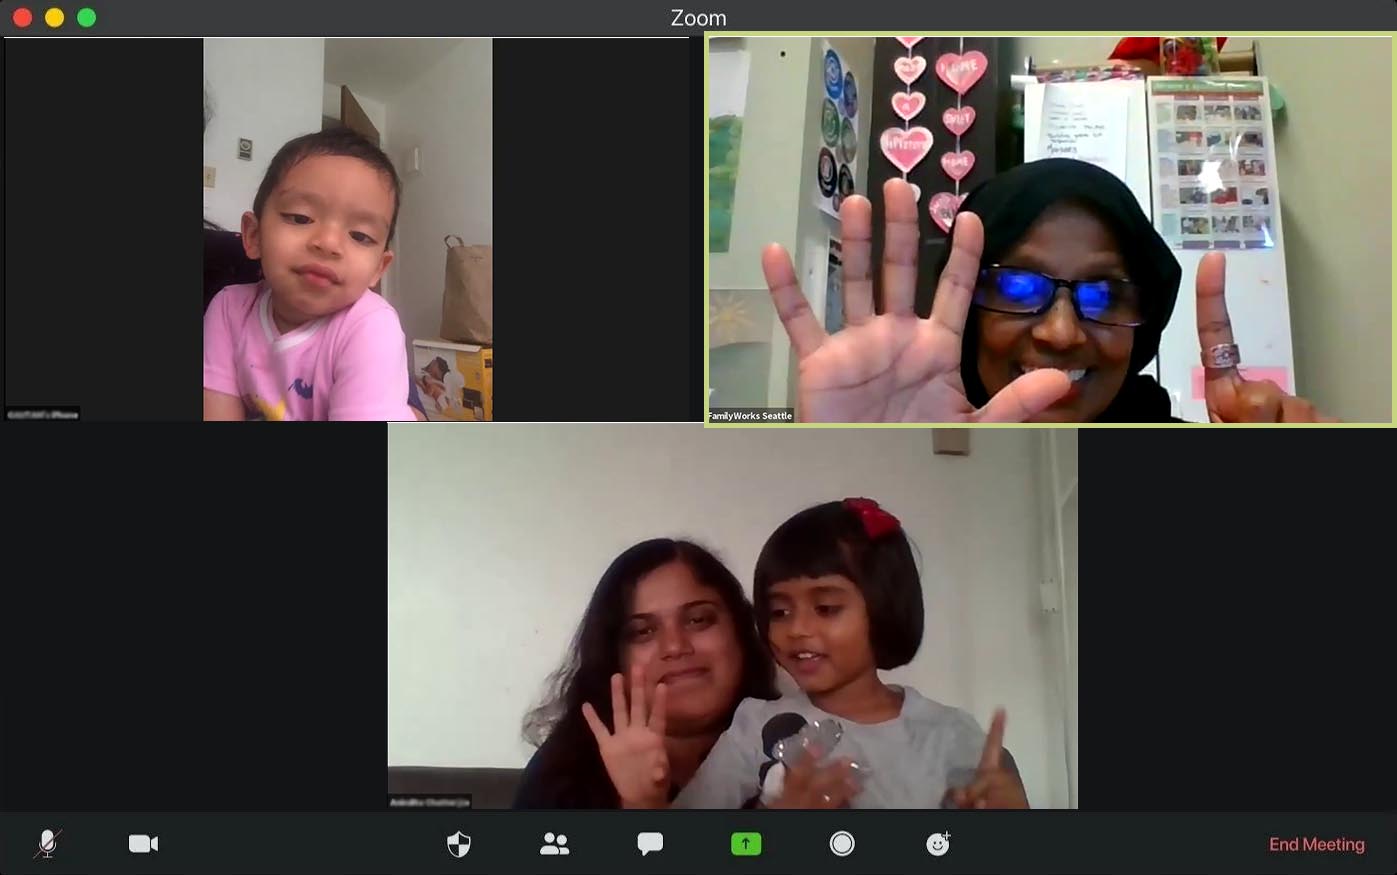 A Zoom video chat window showing three participants of a virtual playgroup doing a counting activity.